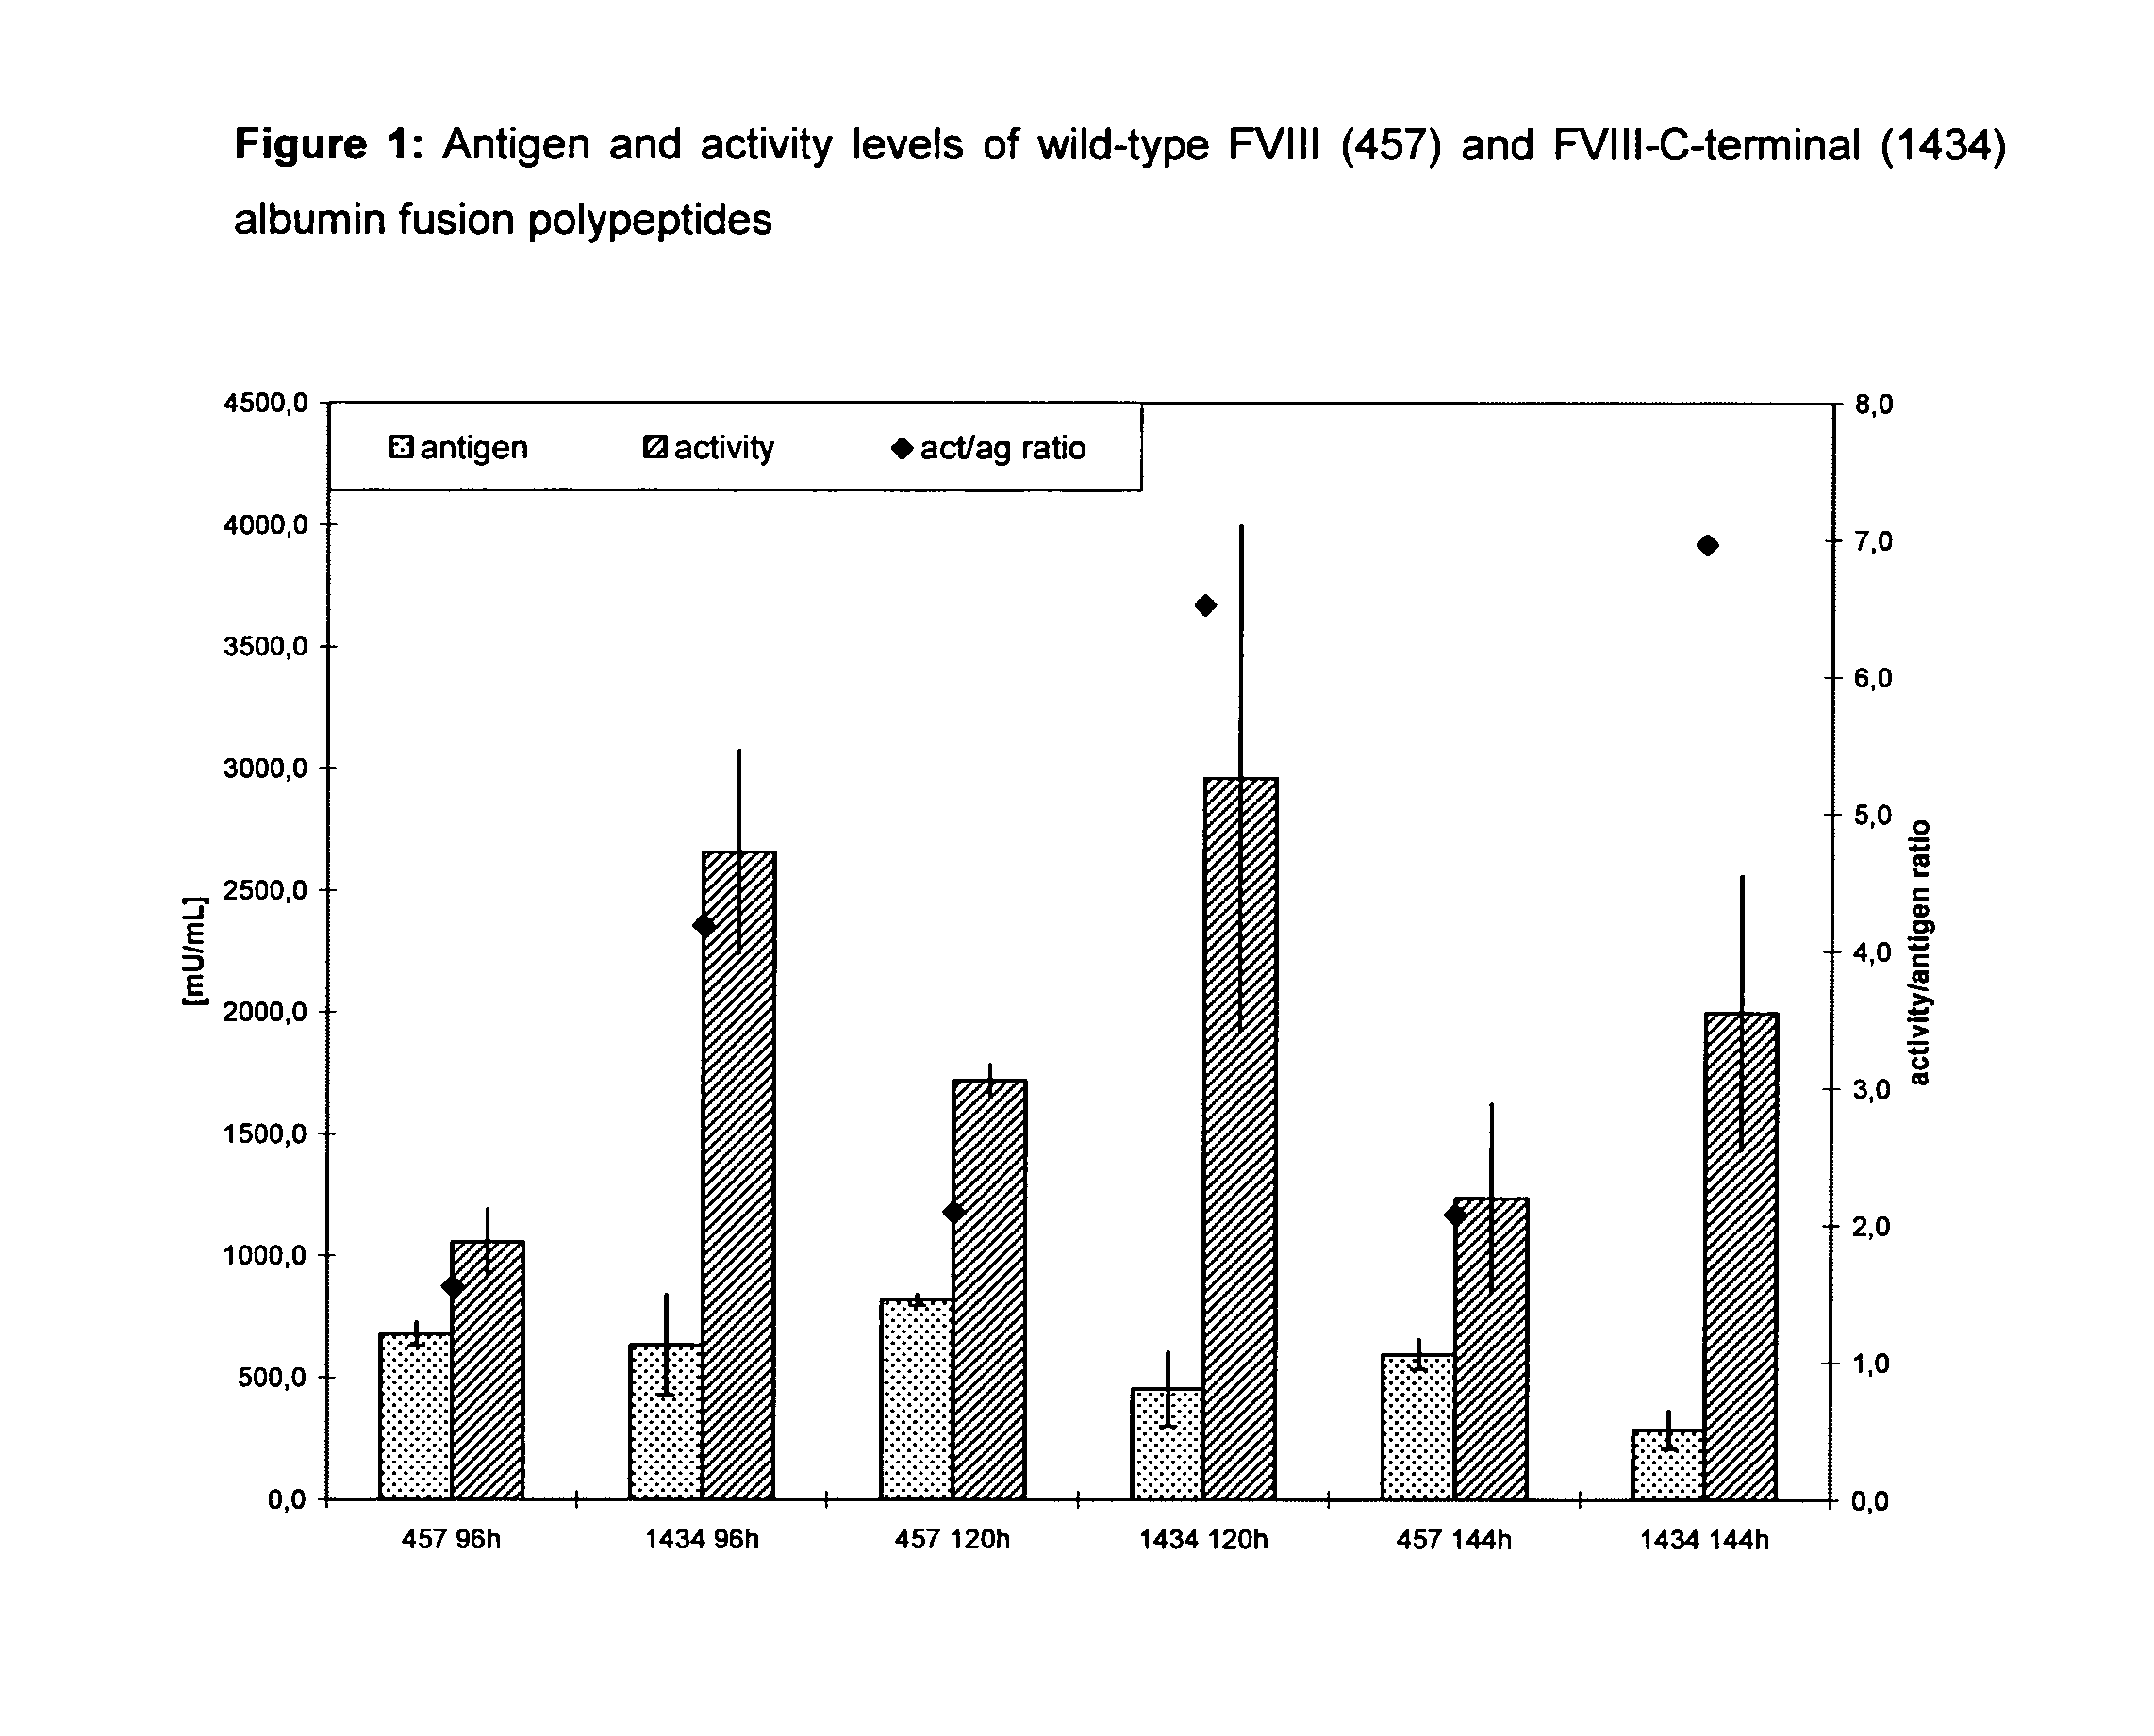 Factor VIII, von willebrand factor or complexes thereof with prolonged in vivo half-life